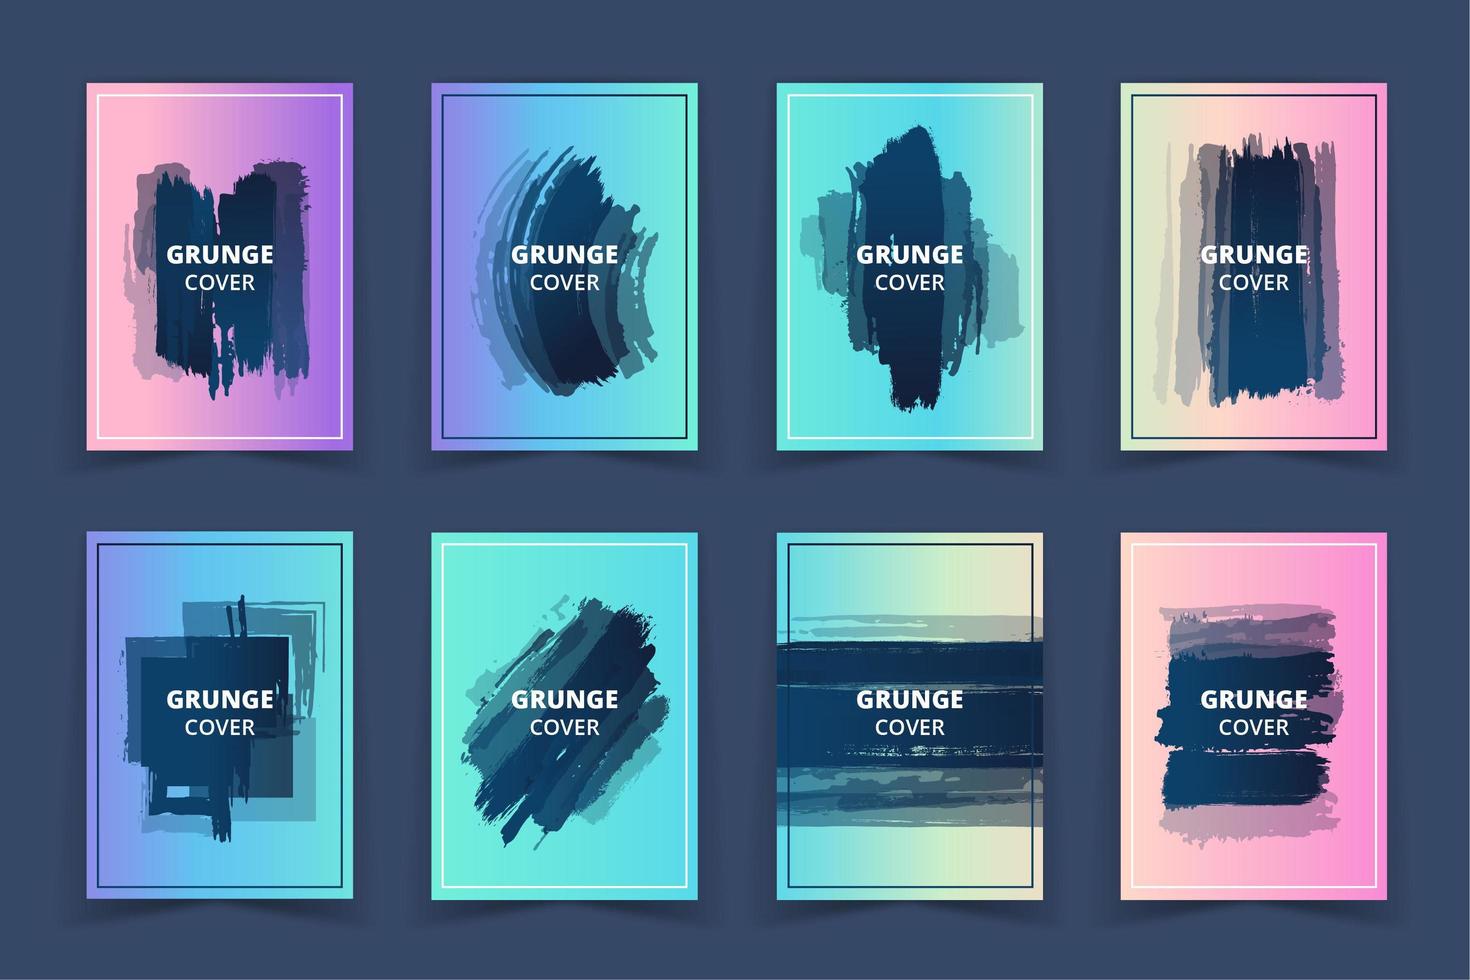 Holographic Grunge Art Cover Banners Set vector